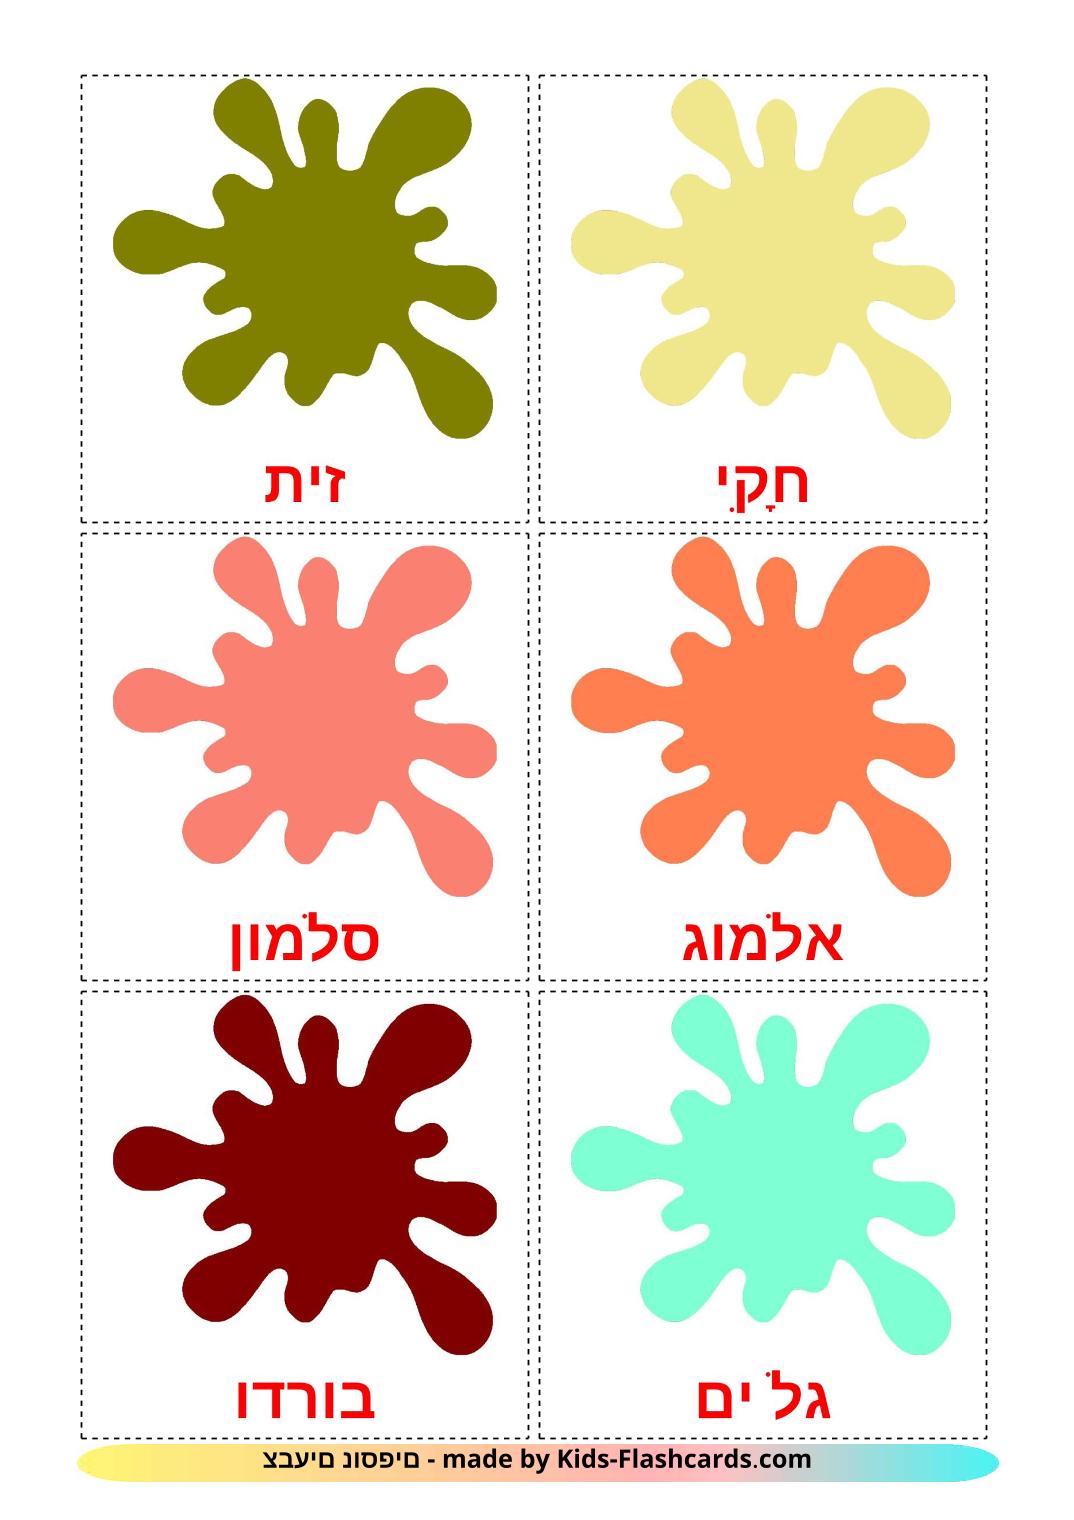 Secondary colors - 20 Free Printable hebrew Flashcards 